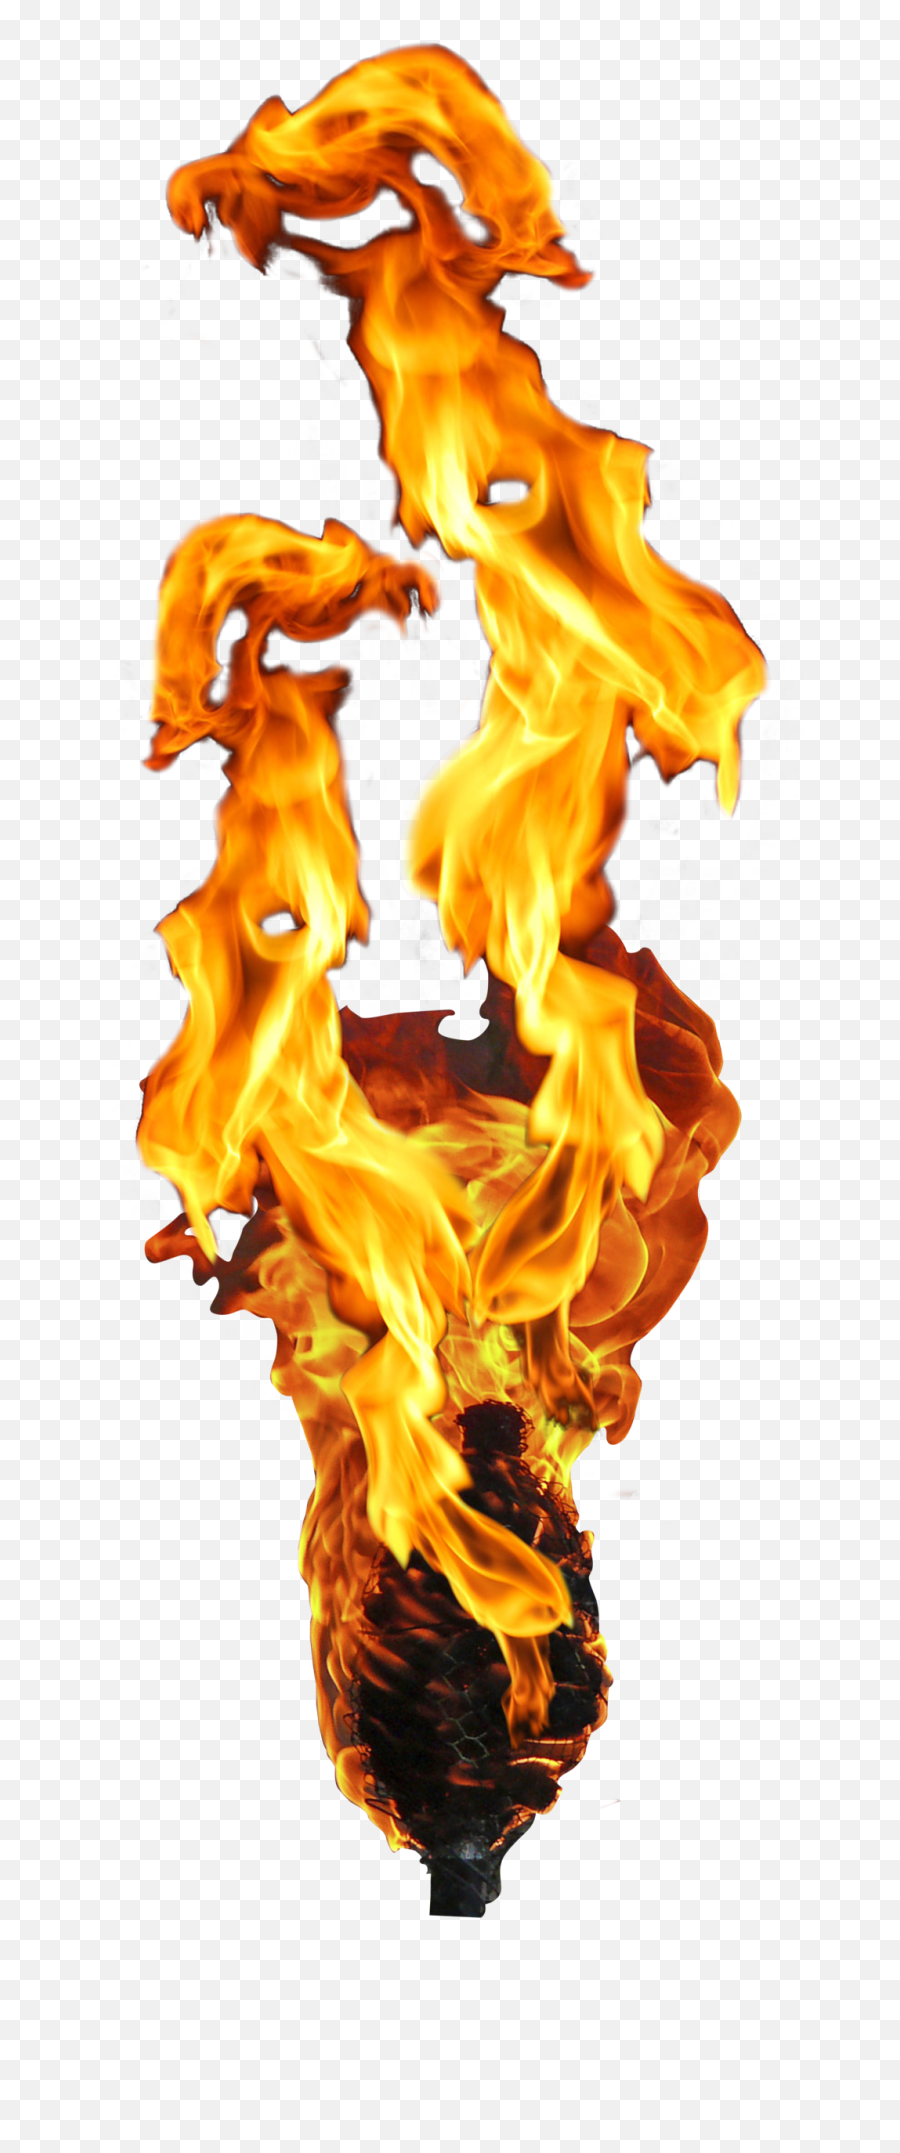 Flame Torch Png Images 20png Snipstock - Transparent Fire Torch Gif Emoji,Torch Png